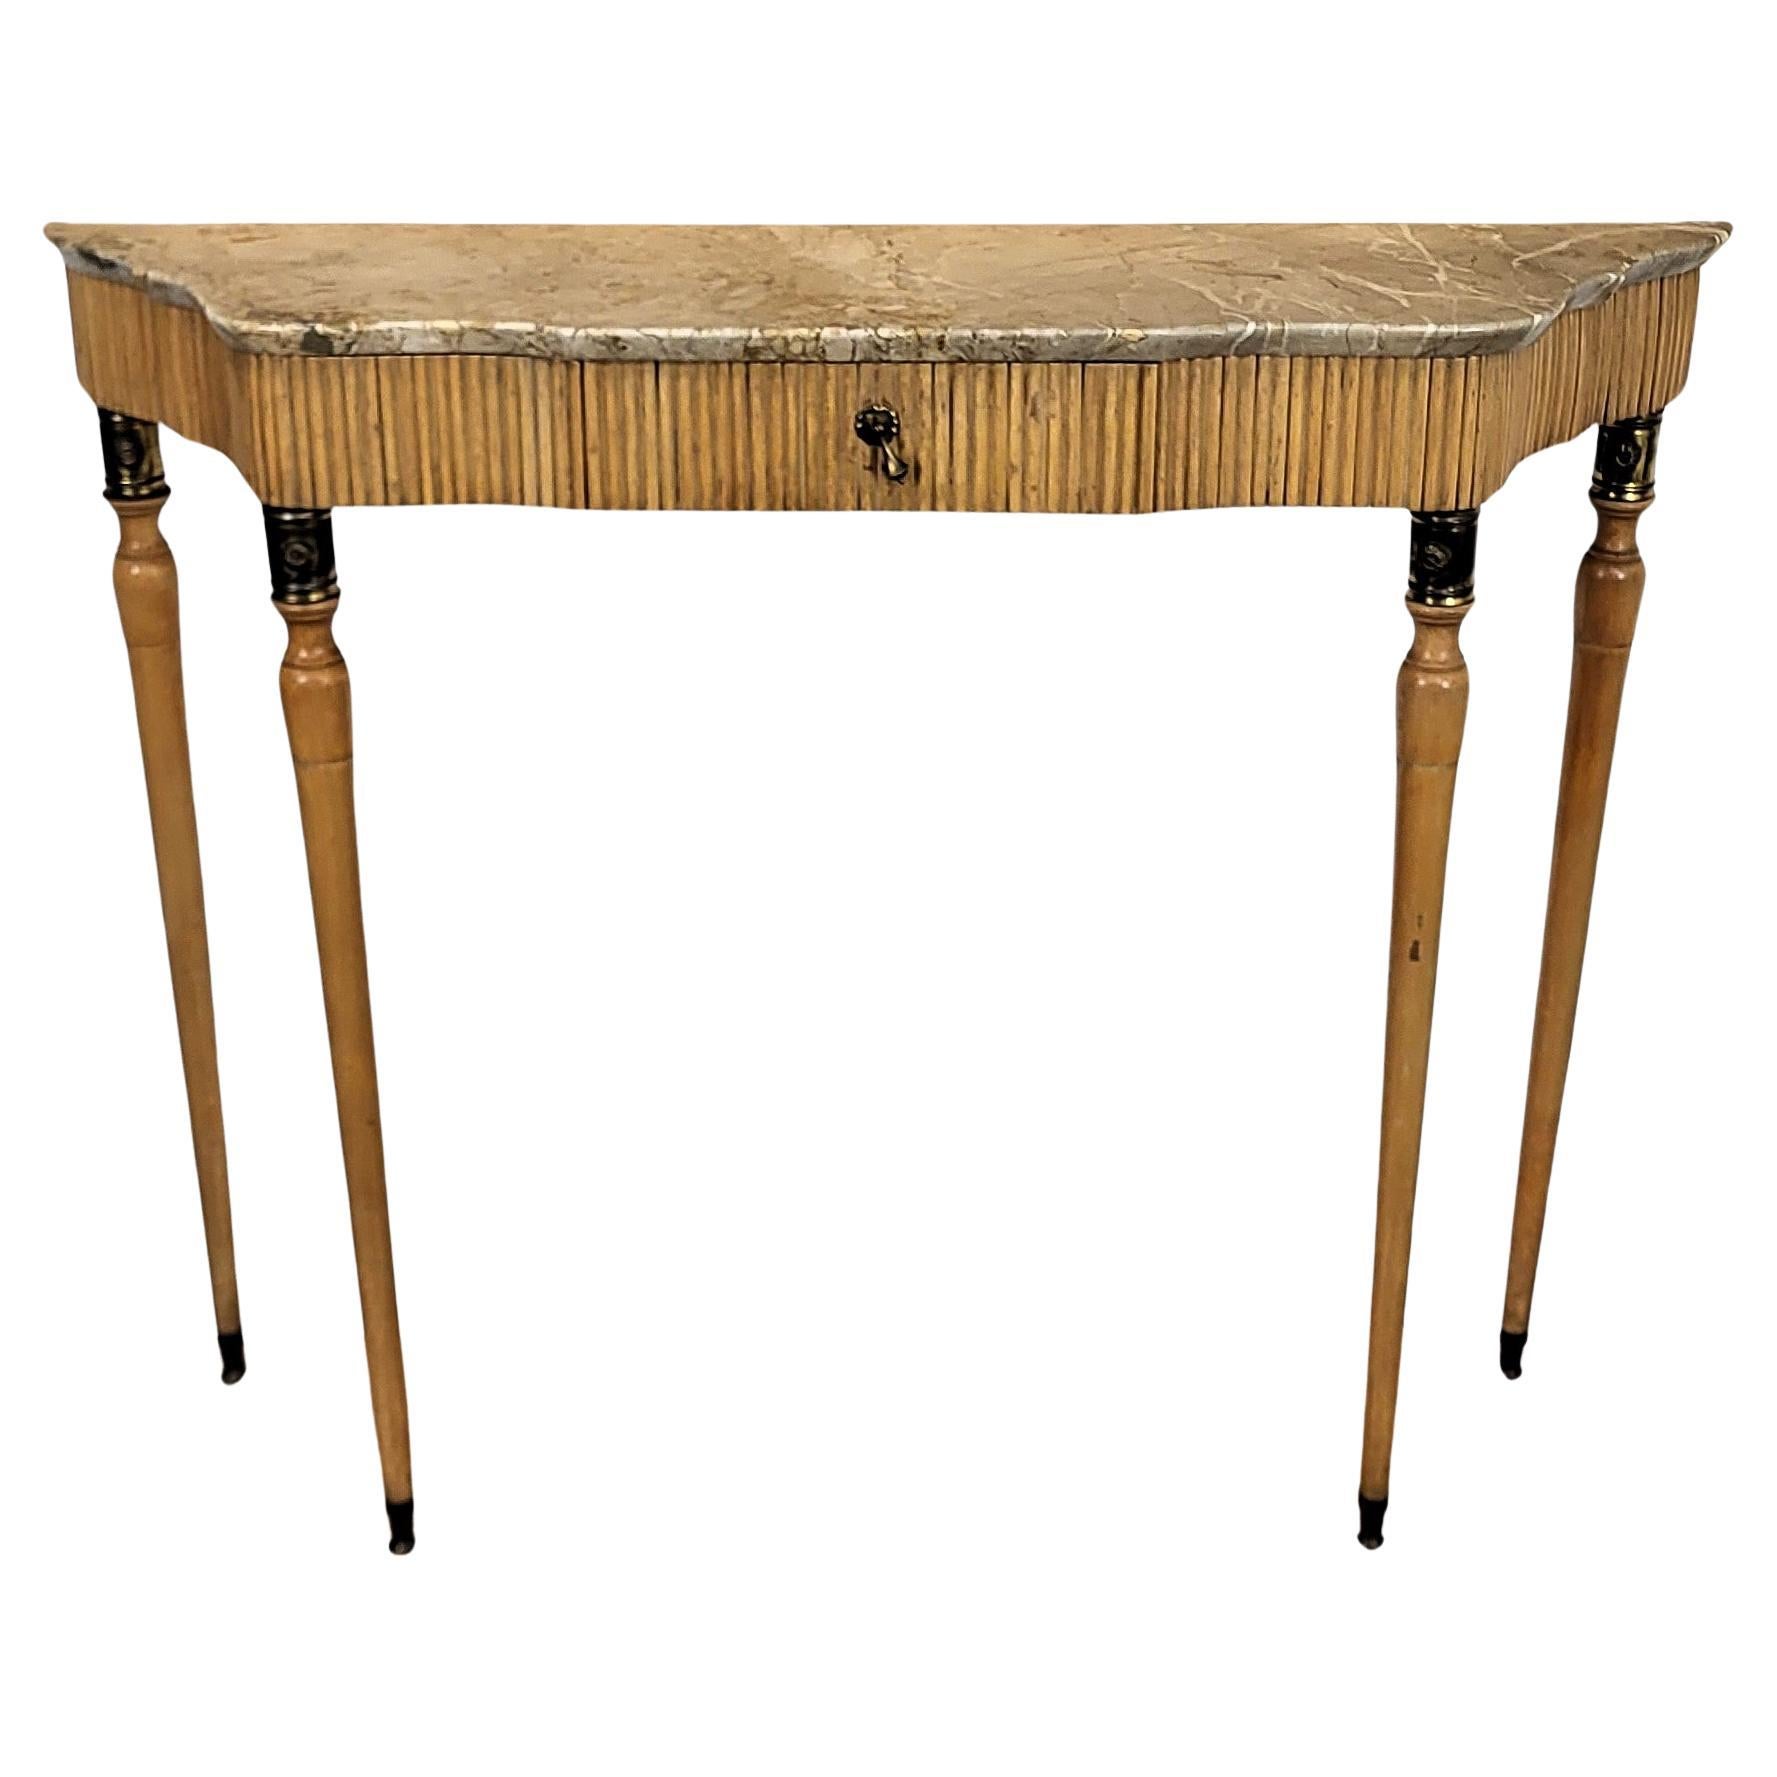 1950s Midcentury Italian Wood Brass Wall Console Table with Marble Top